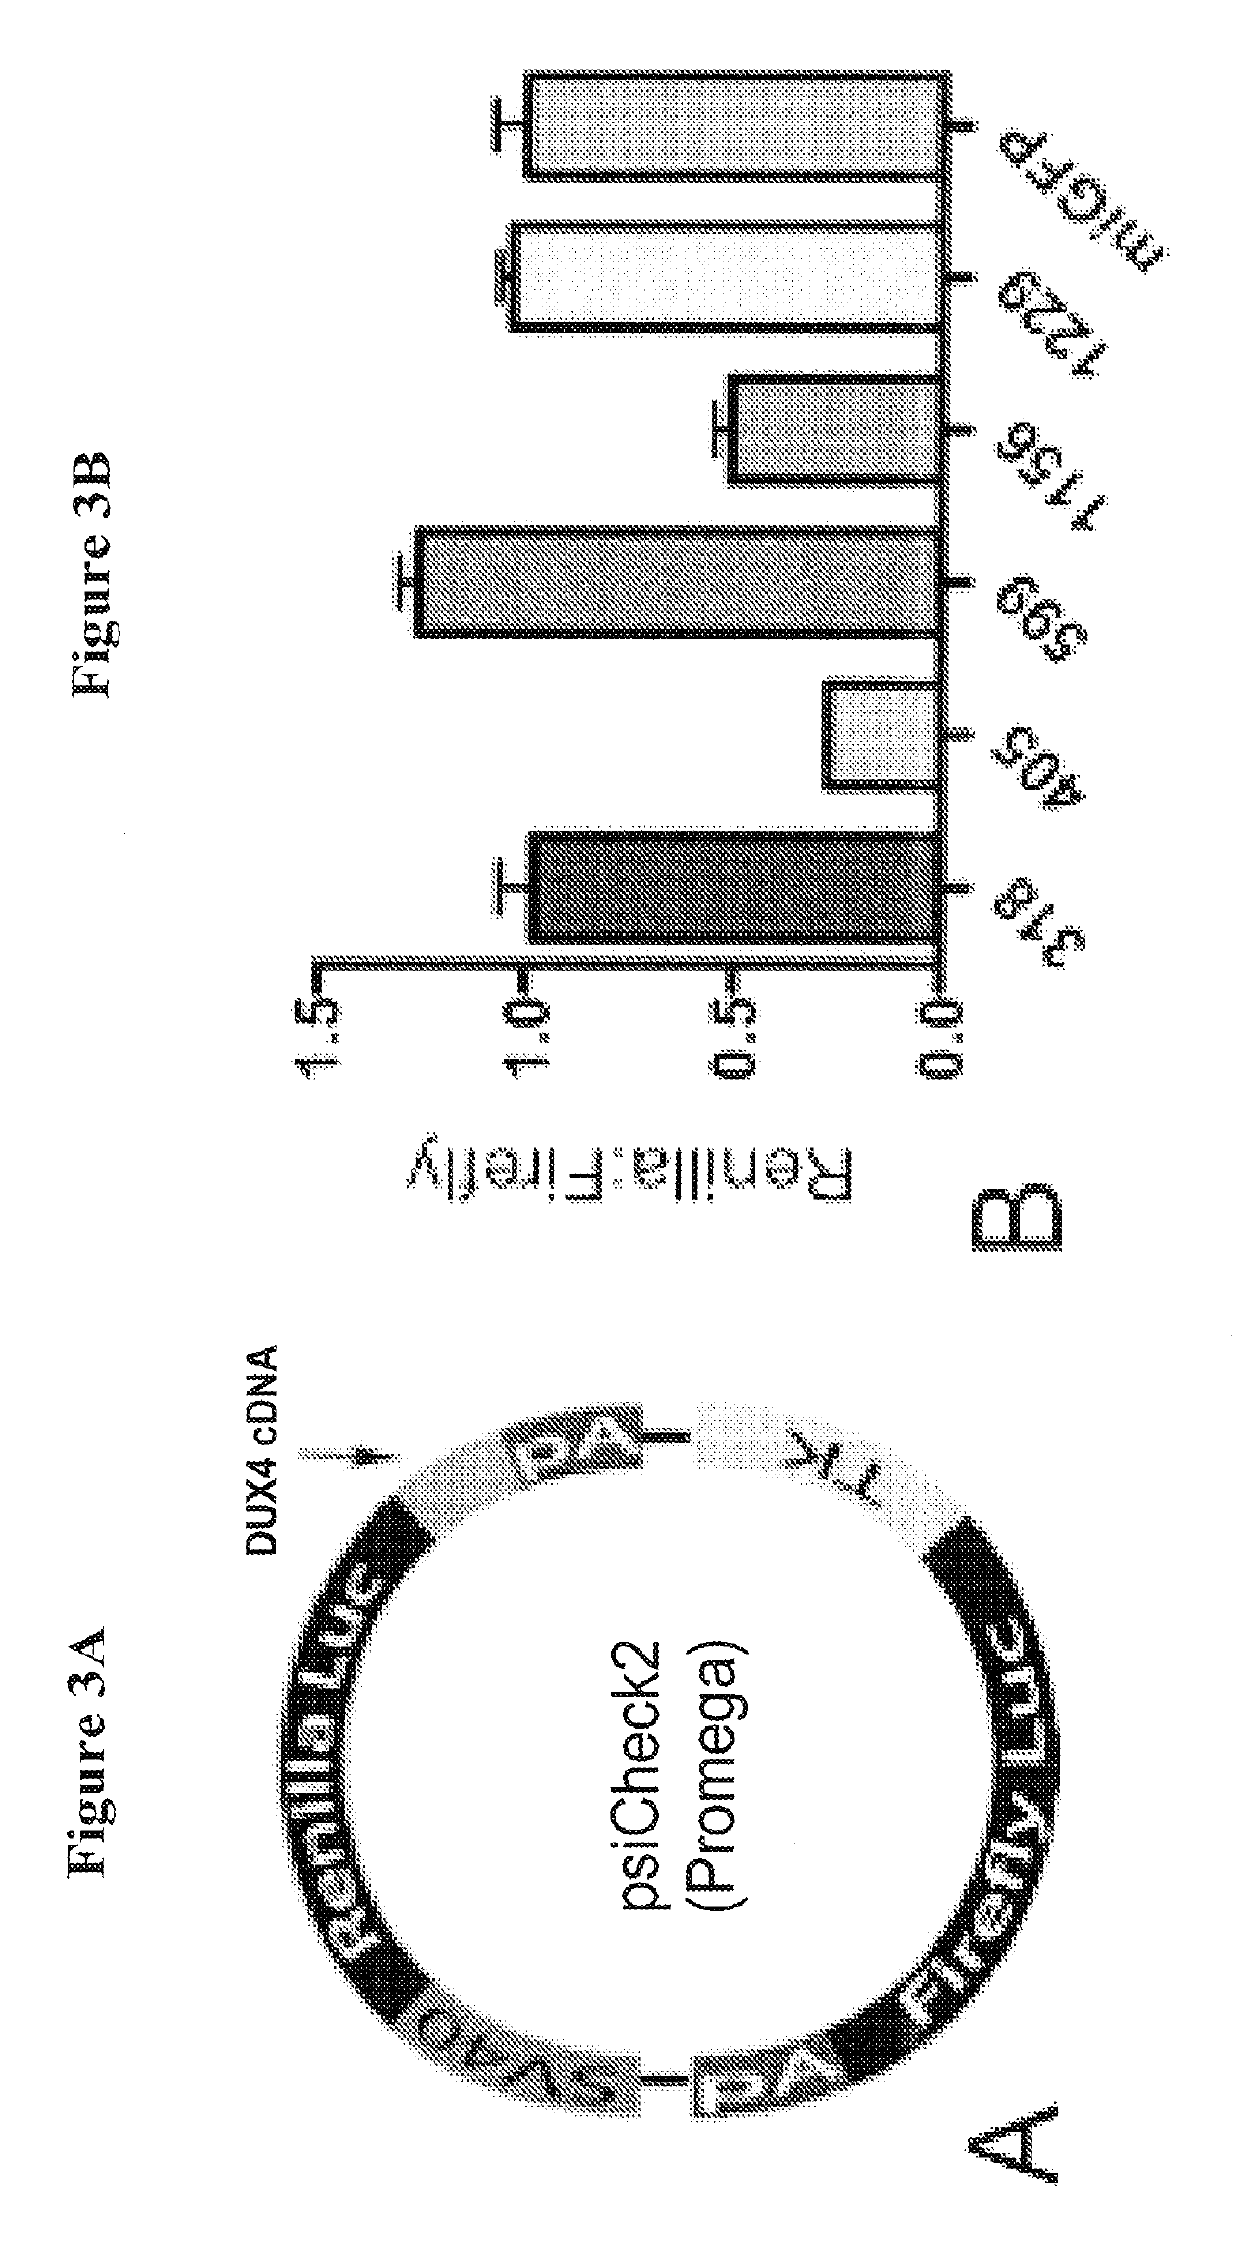 Recombinant virus products and methods for inhibition of expression of DUX4